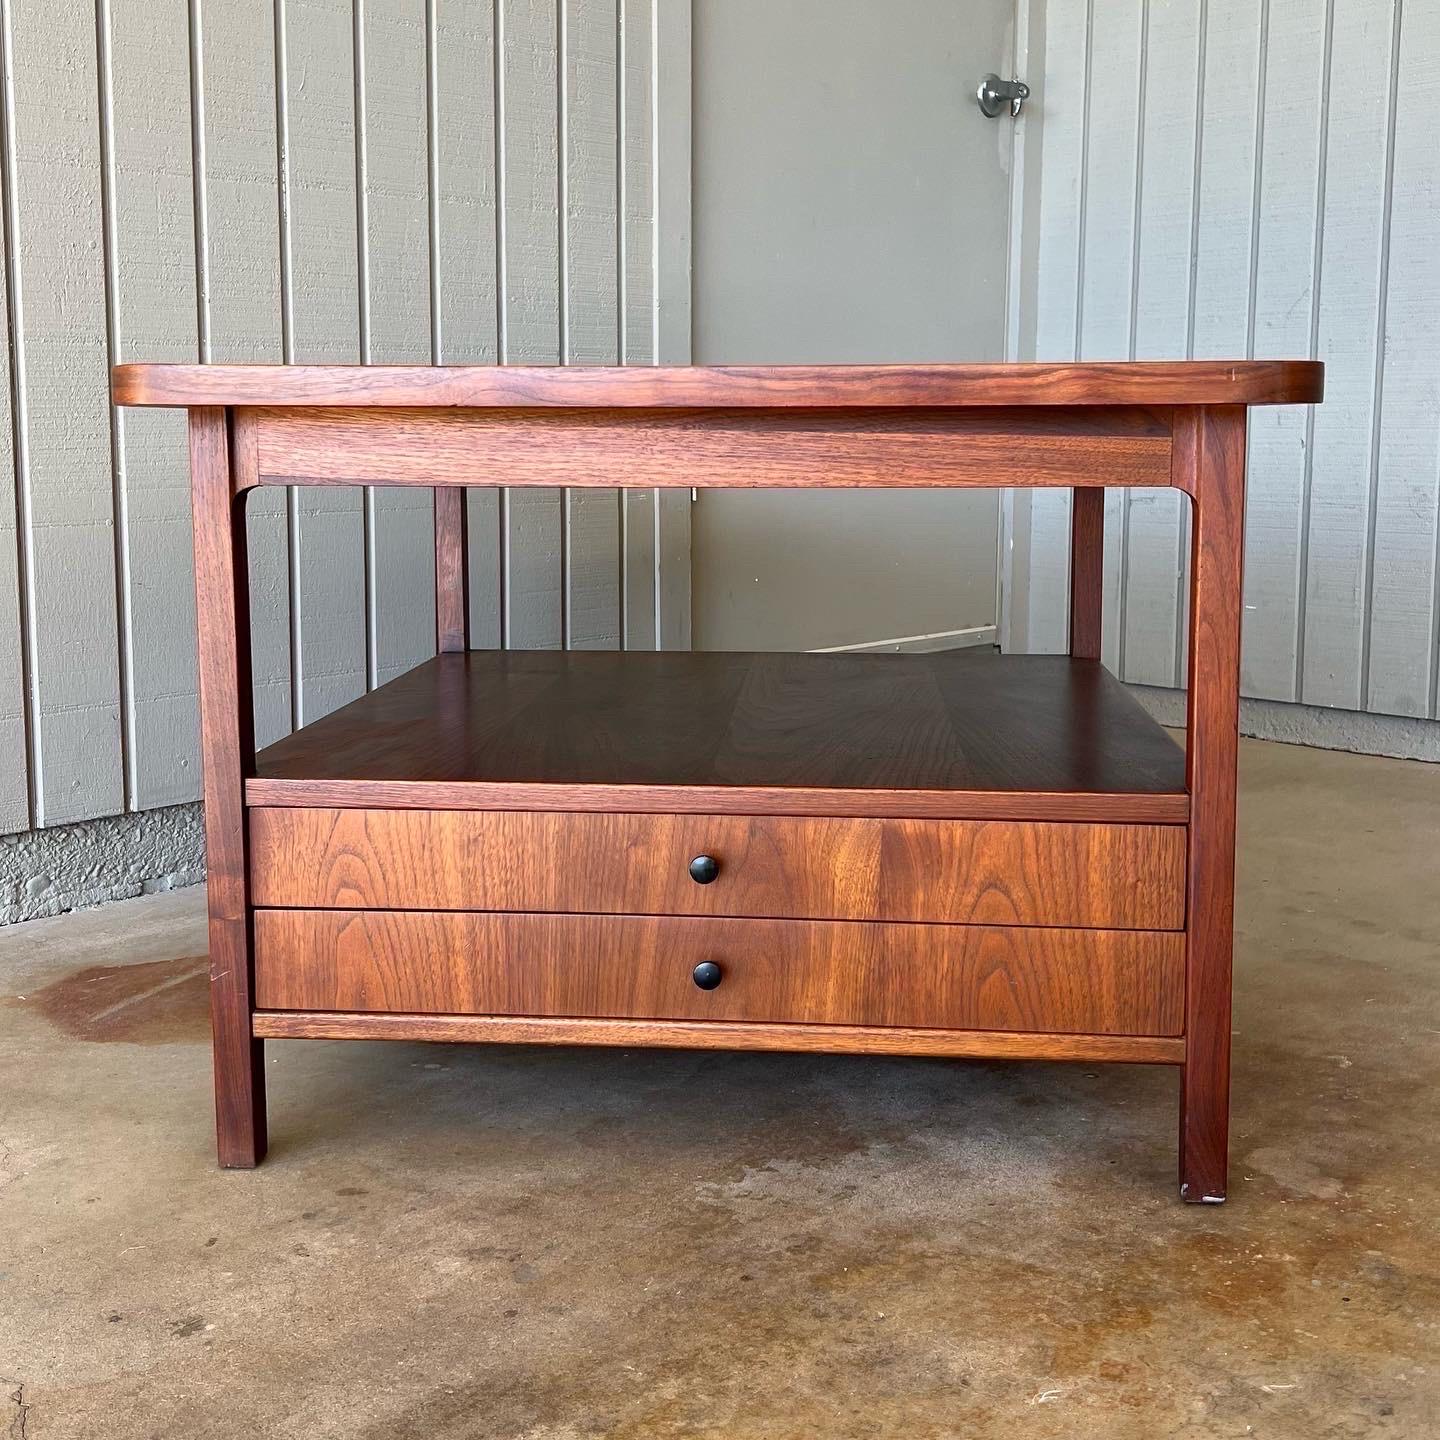 Jack Cartwright for Founders side, end or coffee table, 1960s. Walnut, black trim accents and black metal pulls. The drawers are full length, so it provides plenty of storage. Only mild signs of wear to the wood. Measures 30” deep x 30” wide x 21.5”